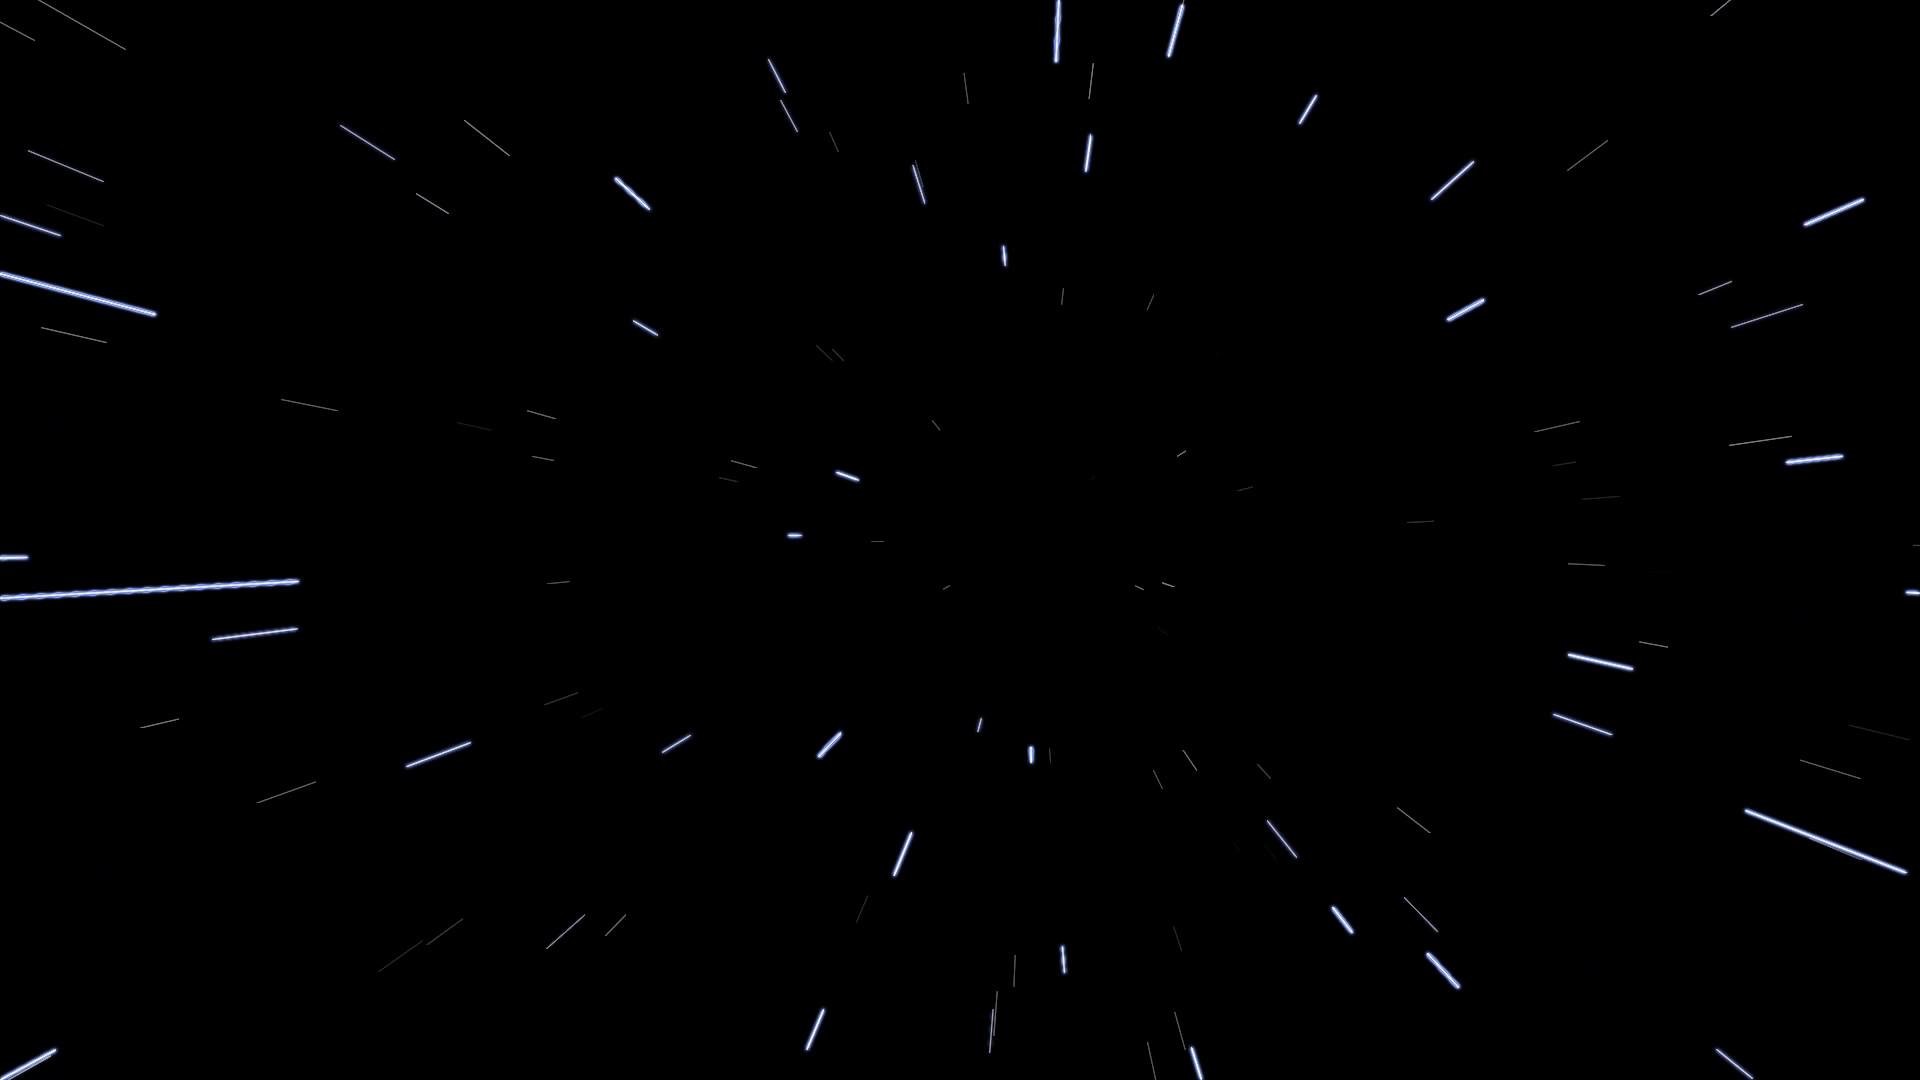 Star Wars Space Background Image